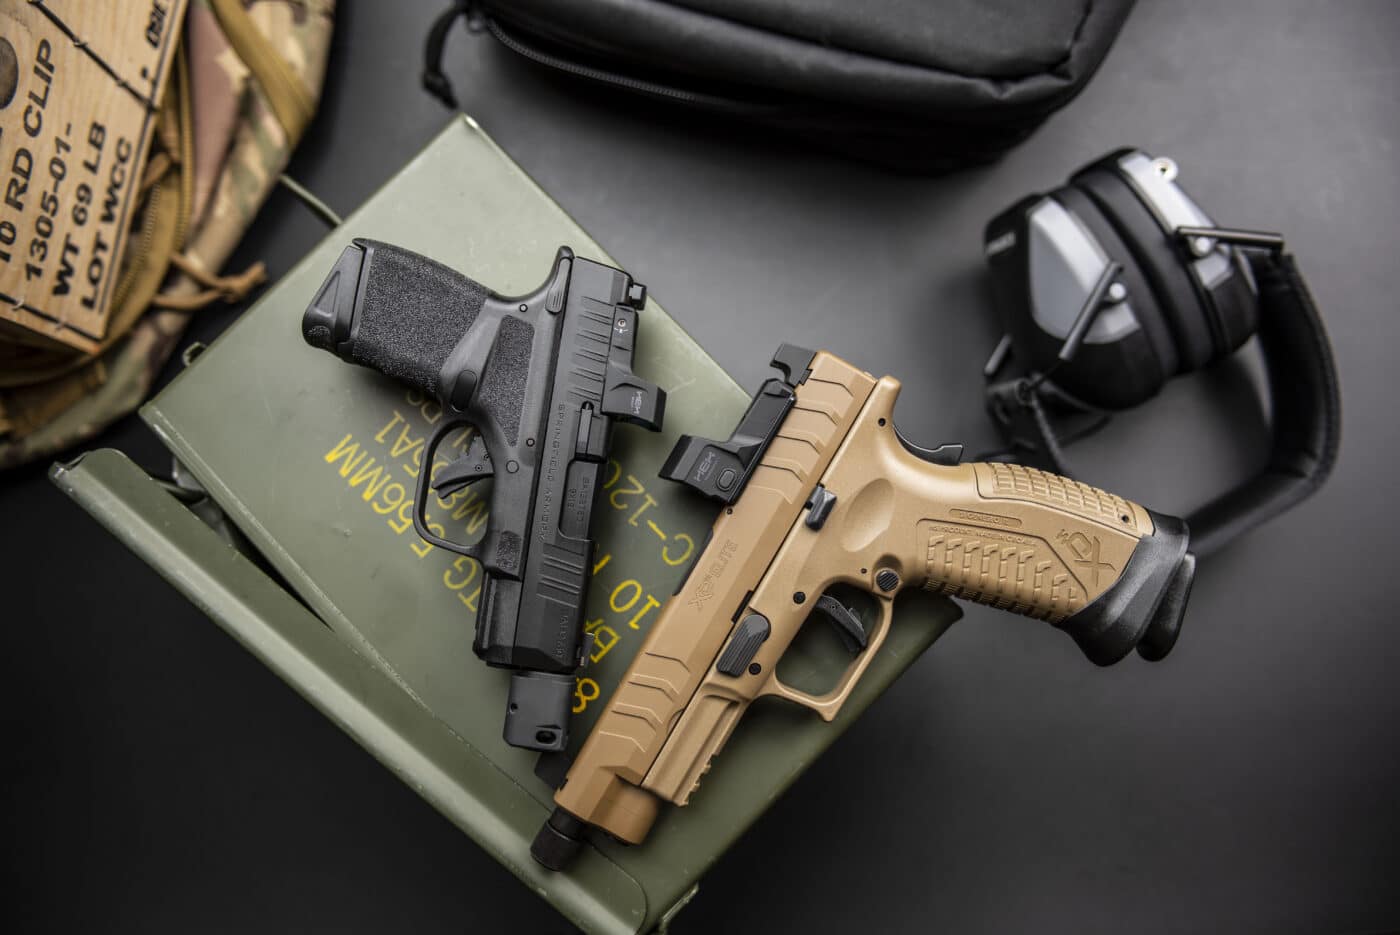 Springfield Armory Hellcat and XD-M Elite polymer pistols on top of ammo box